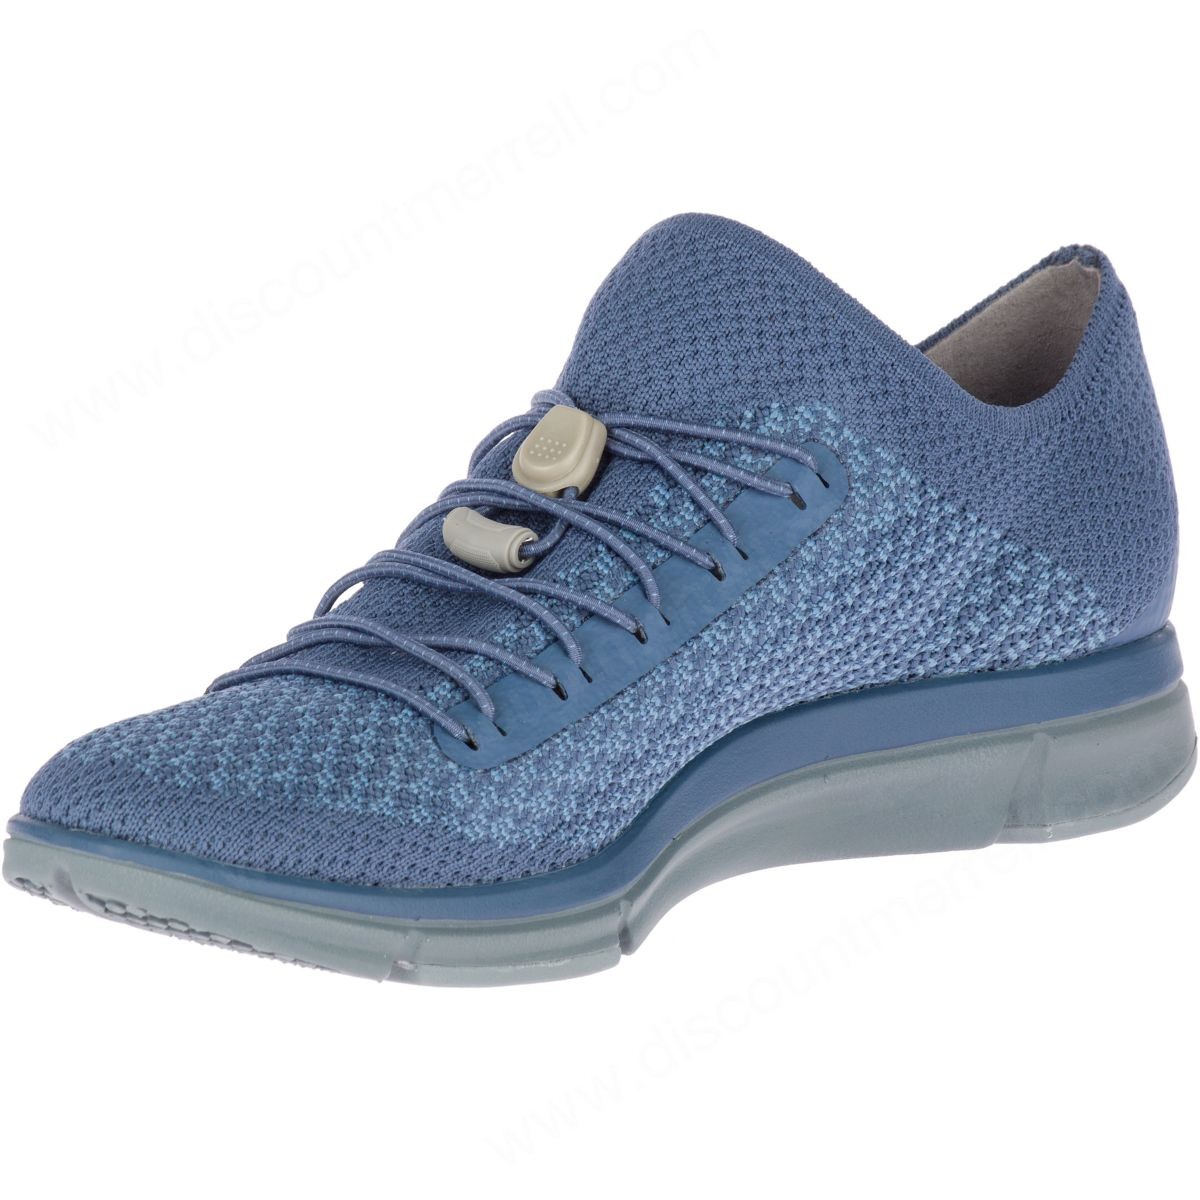 Merrell Womens's Zoe Sojourn Lace Knit Q2 Bering Sea - -5